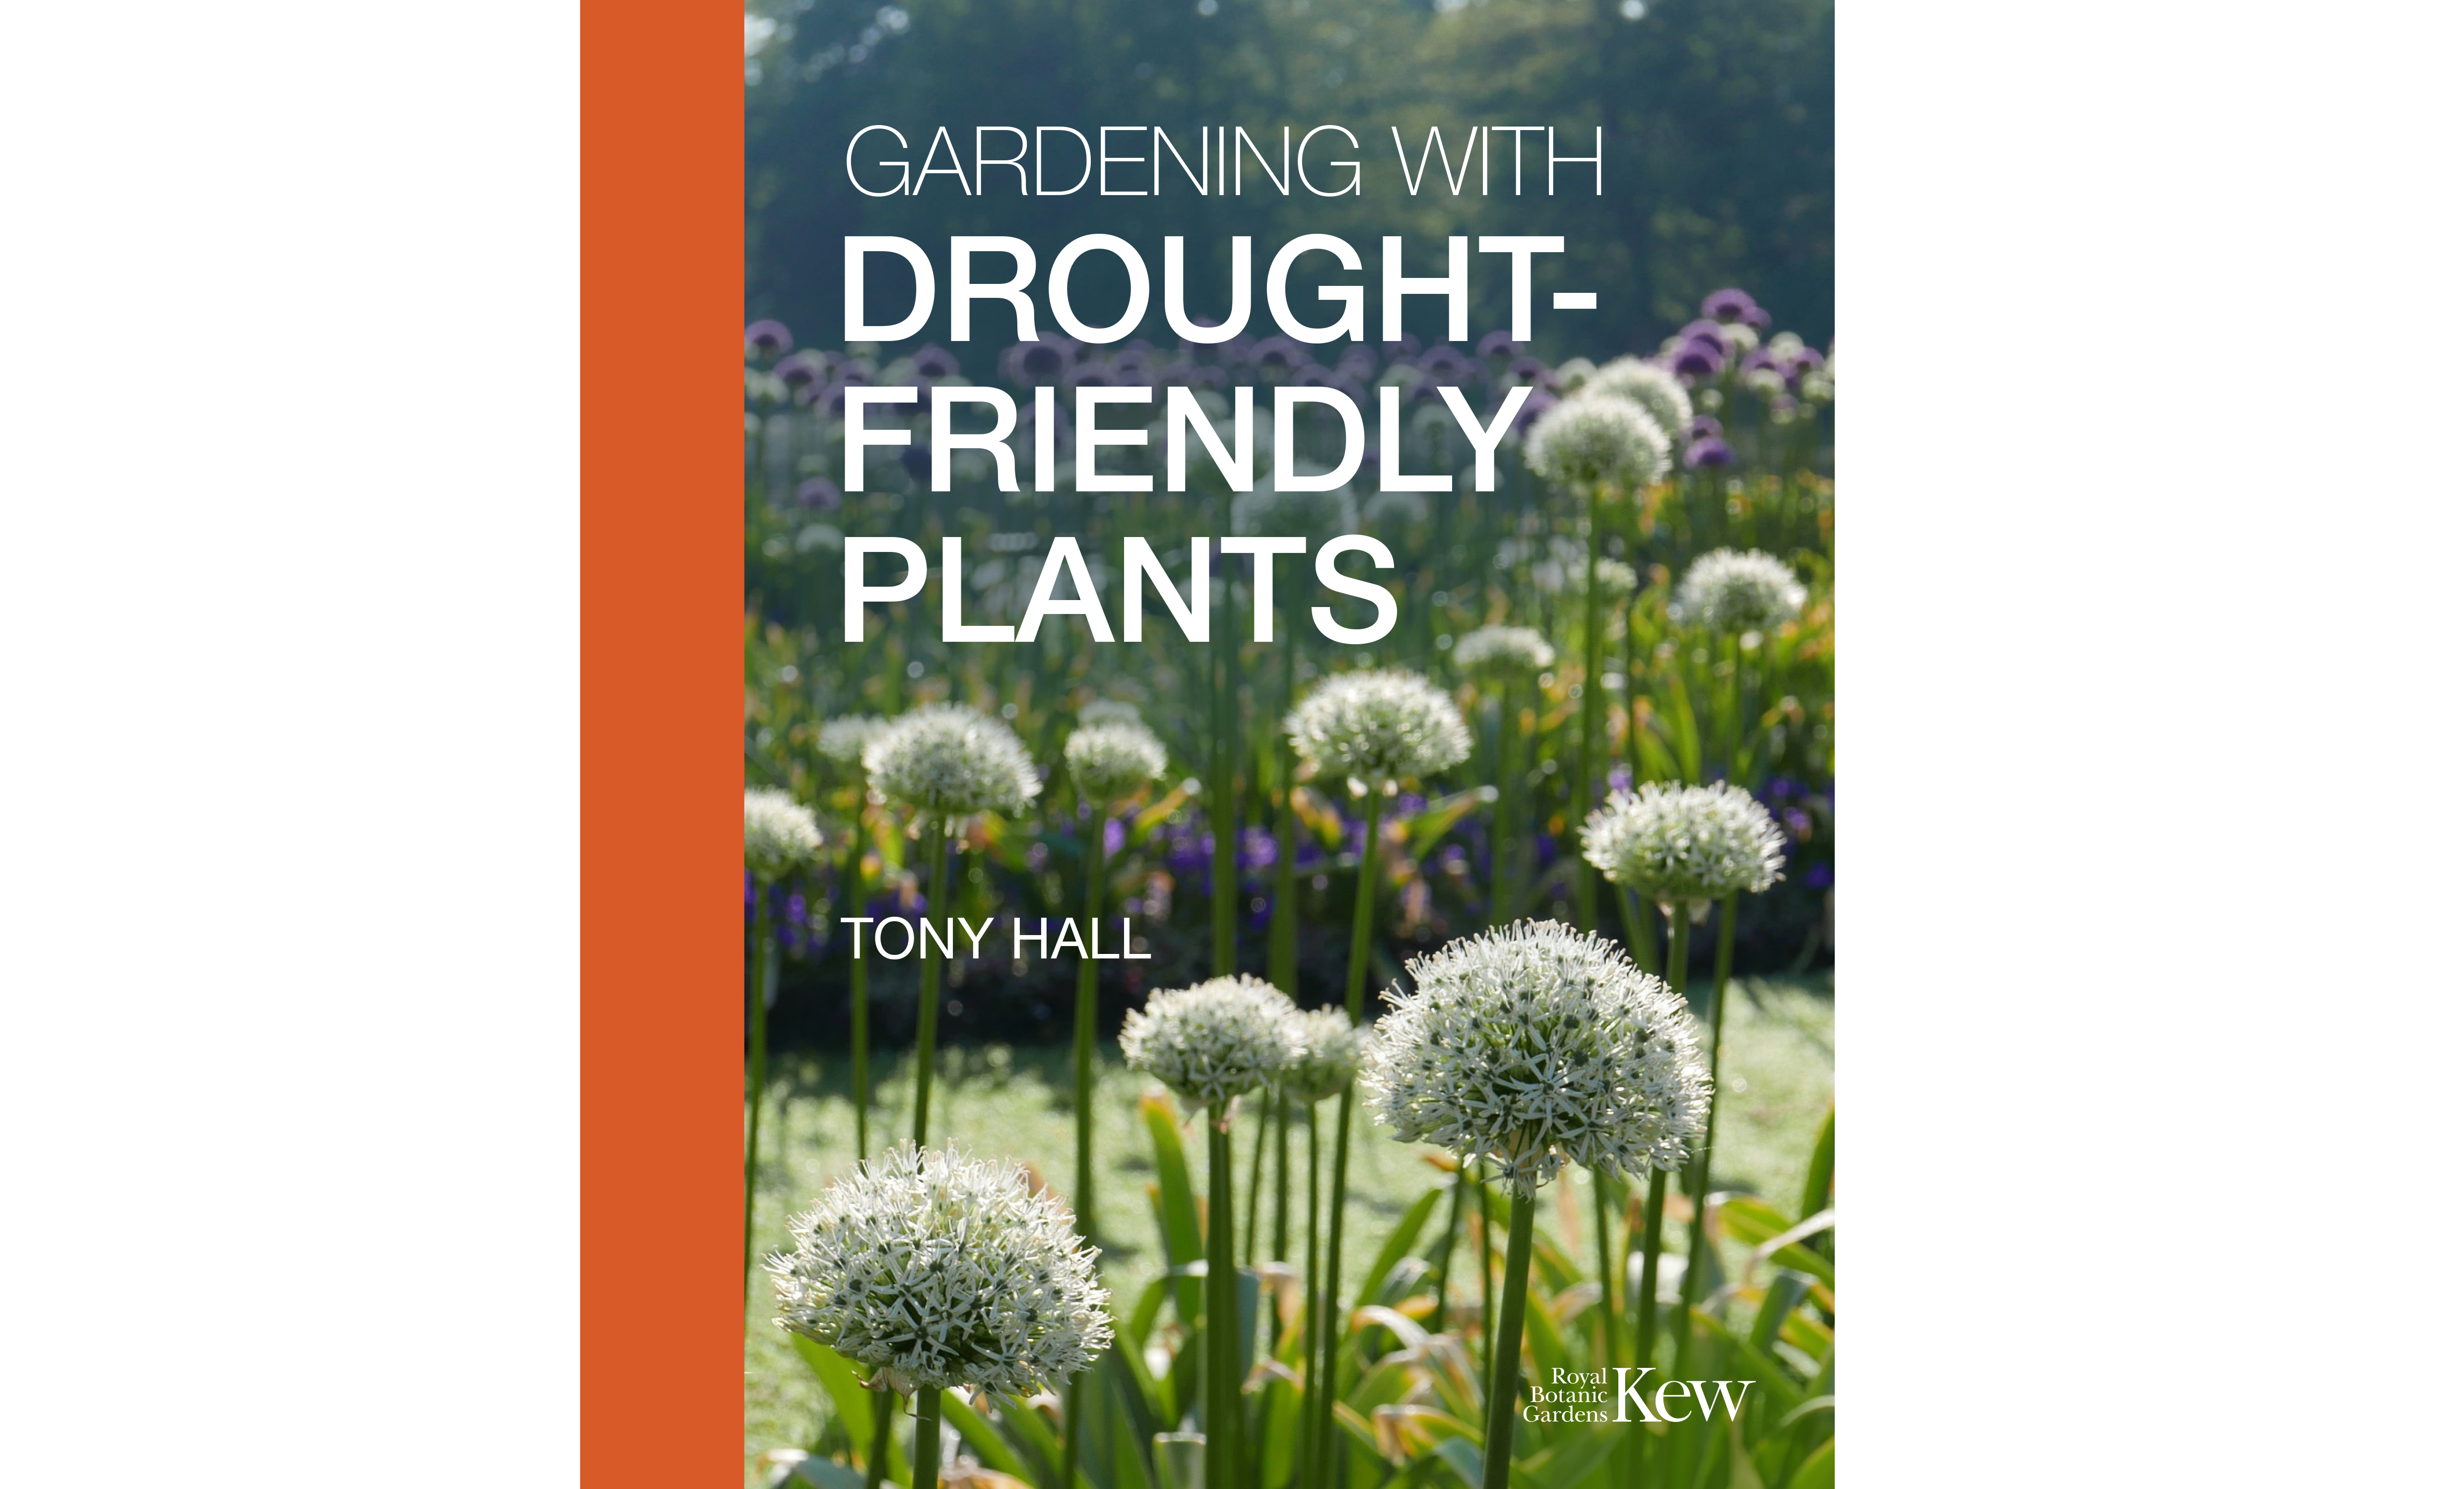 Book jacket of Gardening With Drought-Friendly Plants by Tony Hall (Kew Publishing/PA.)